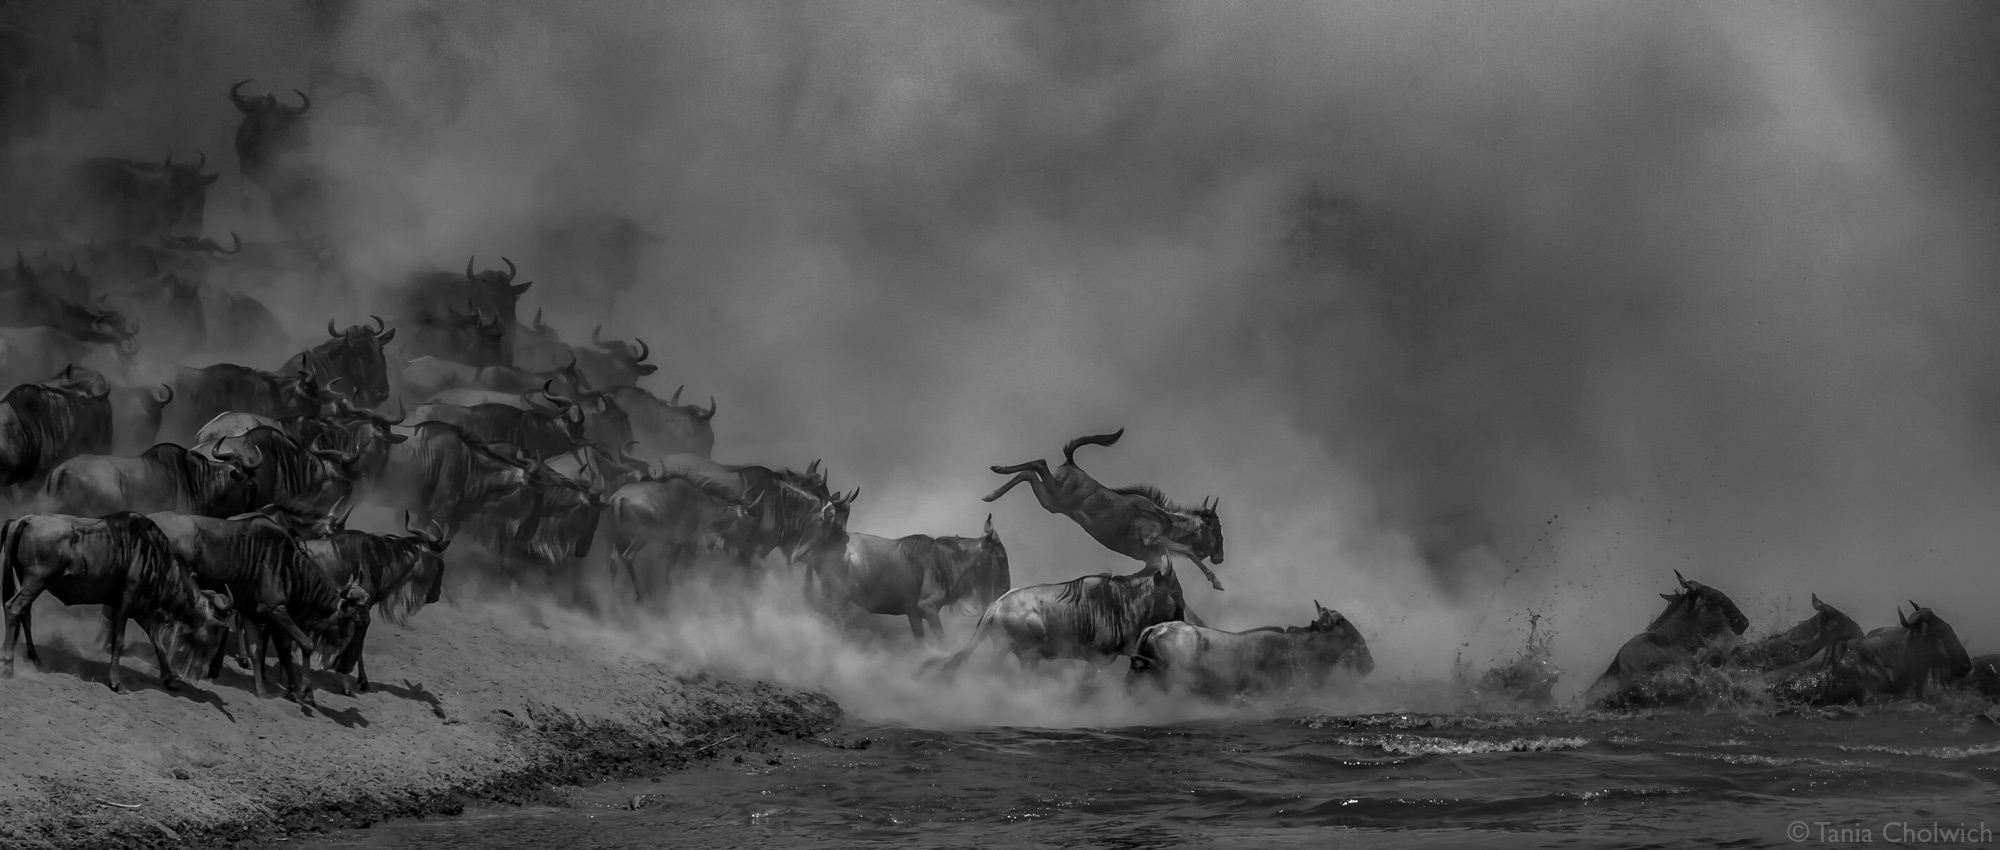 Wildbeest entering the Mara River during the Great Migration